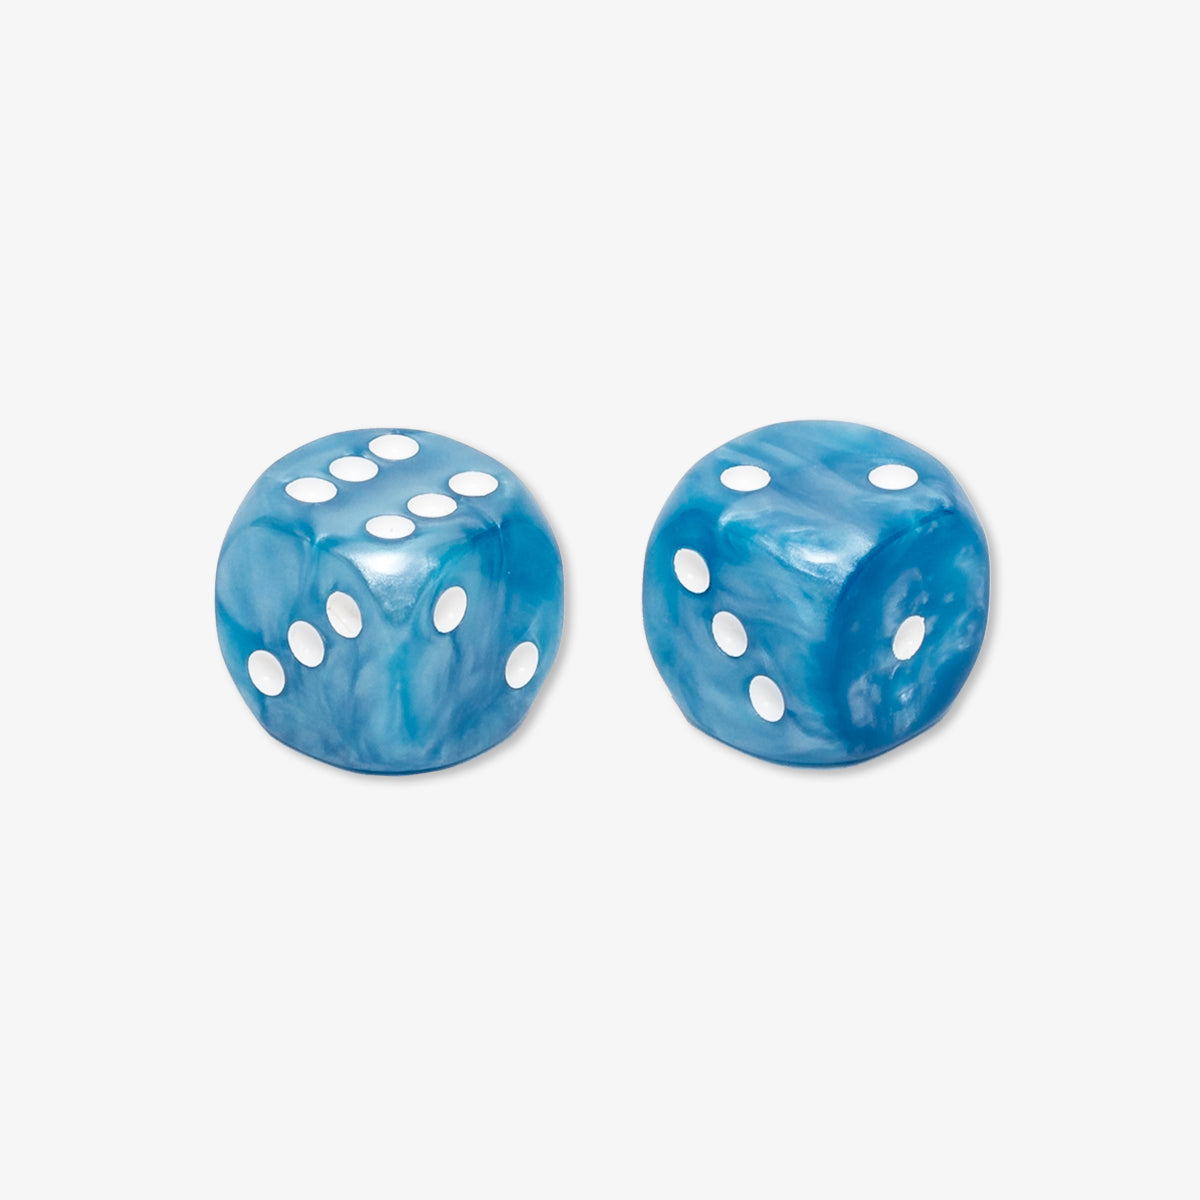 Backgammon Dice Resin Mother-of-Pearl 15 mm Blue